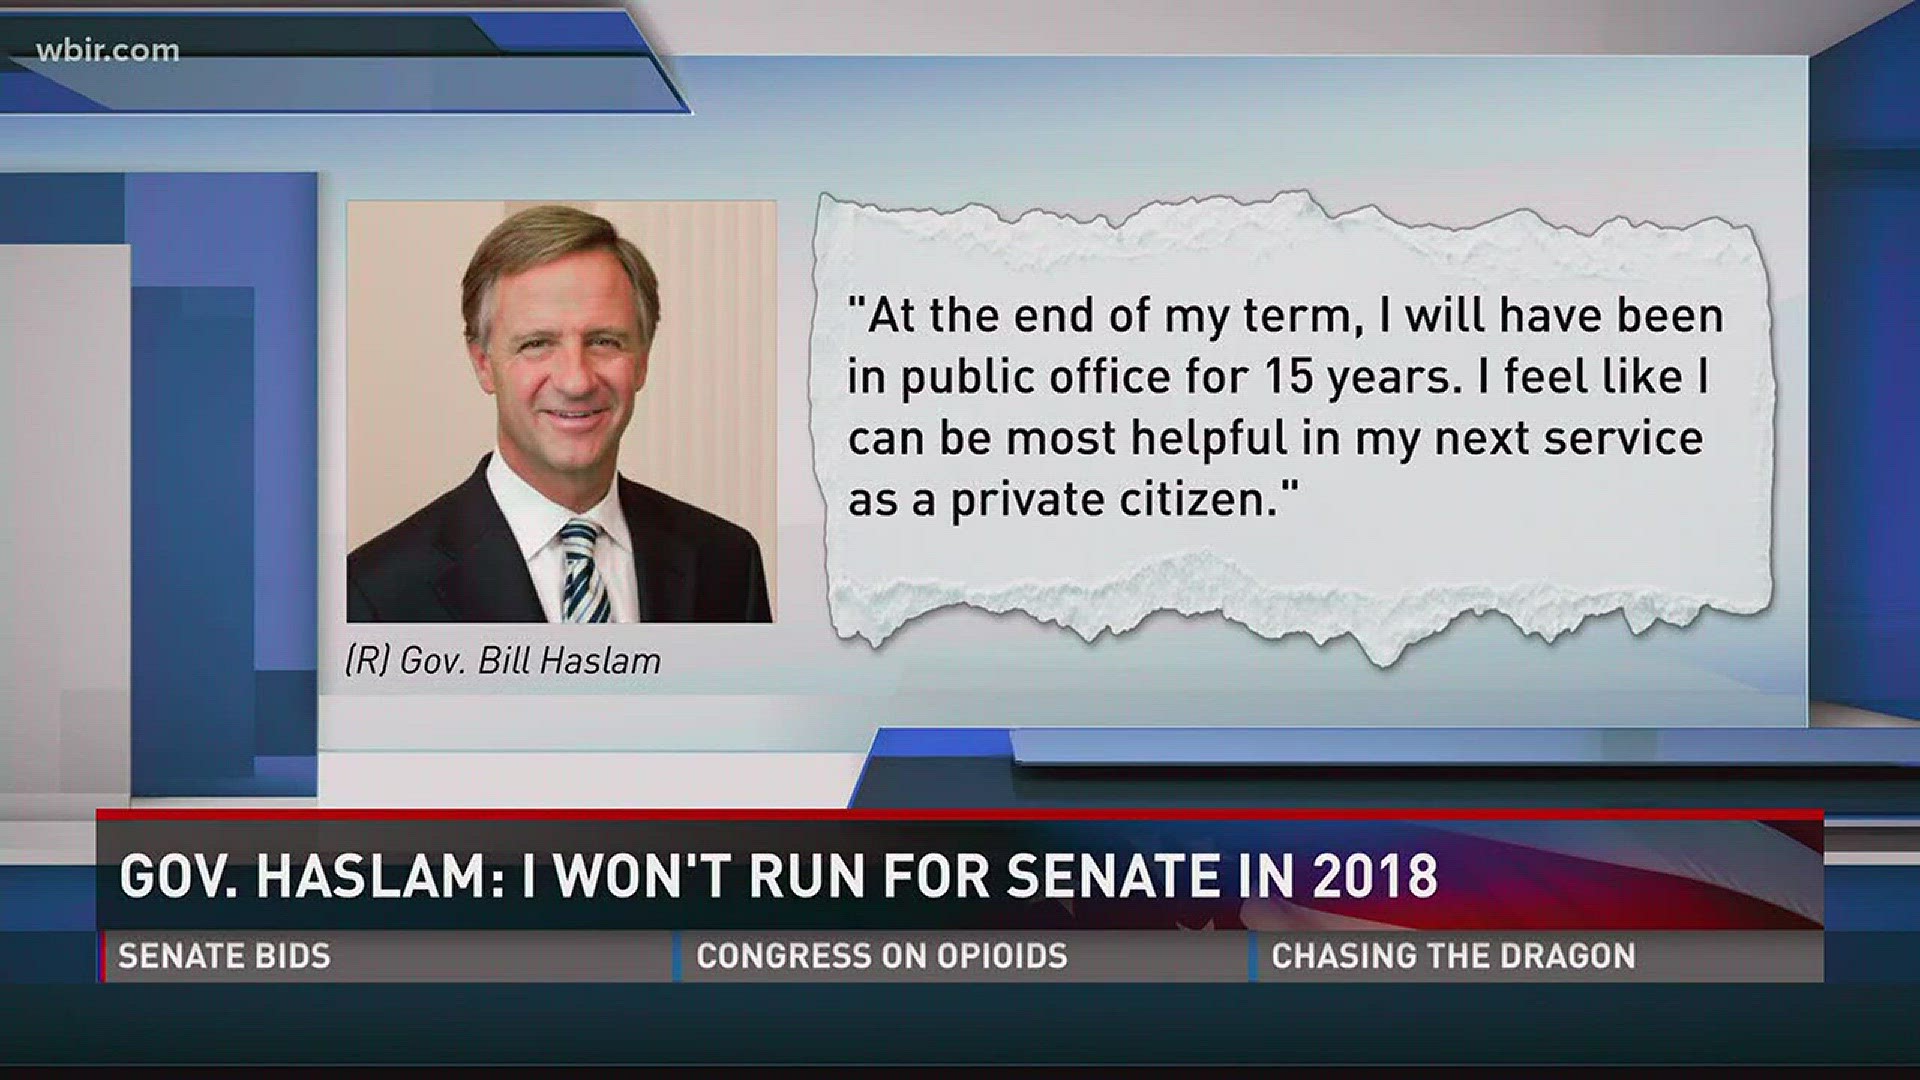 He said in a statement the main reason for that decision is because he wants to spend the last year of his term focusing on governing Tennessee.